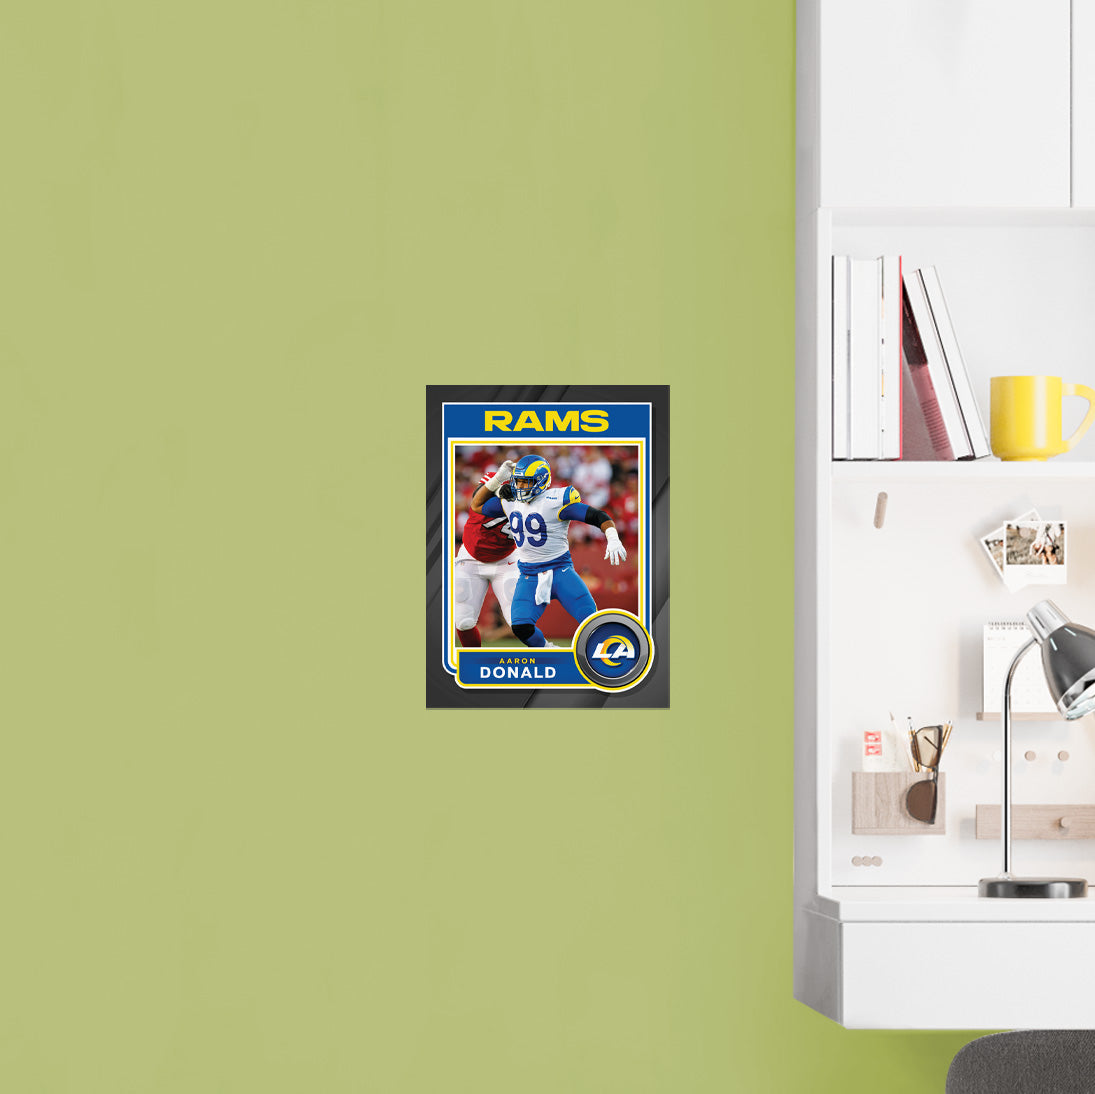 Los Angeles Rams: Aaron Donald Poster - Officially Licensed NFL Removable Adhesive Decal